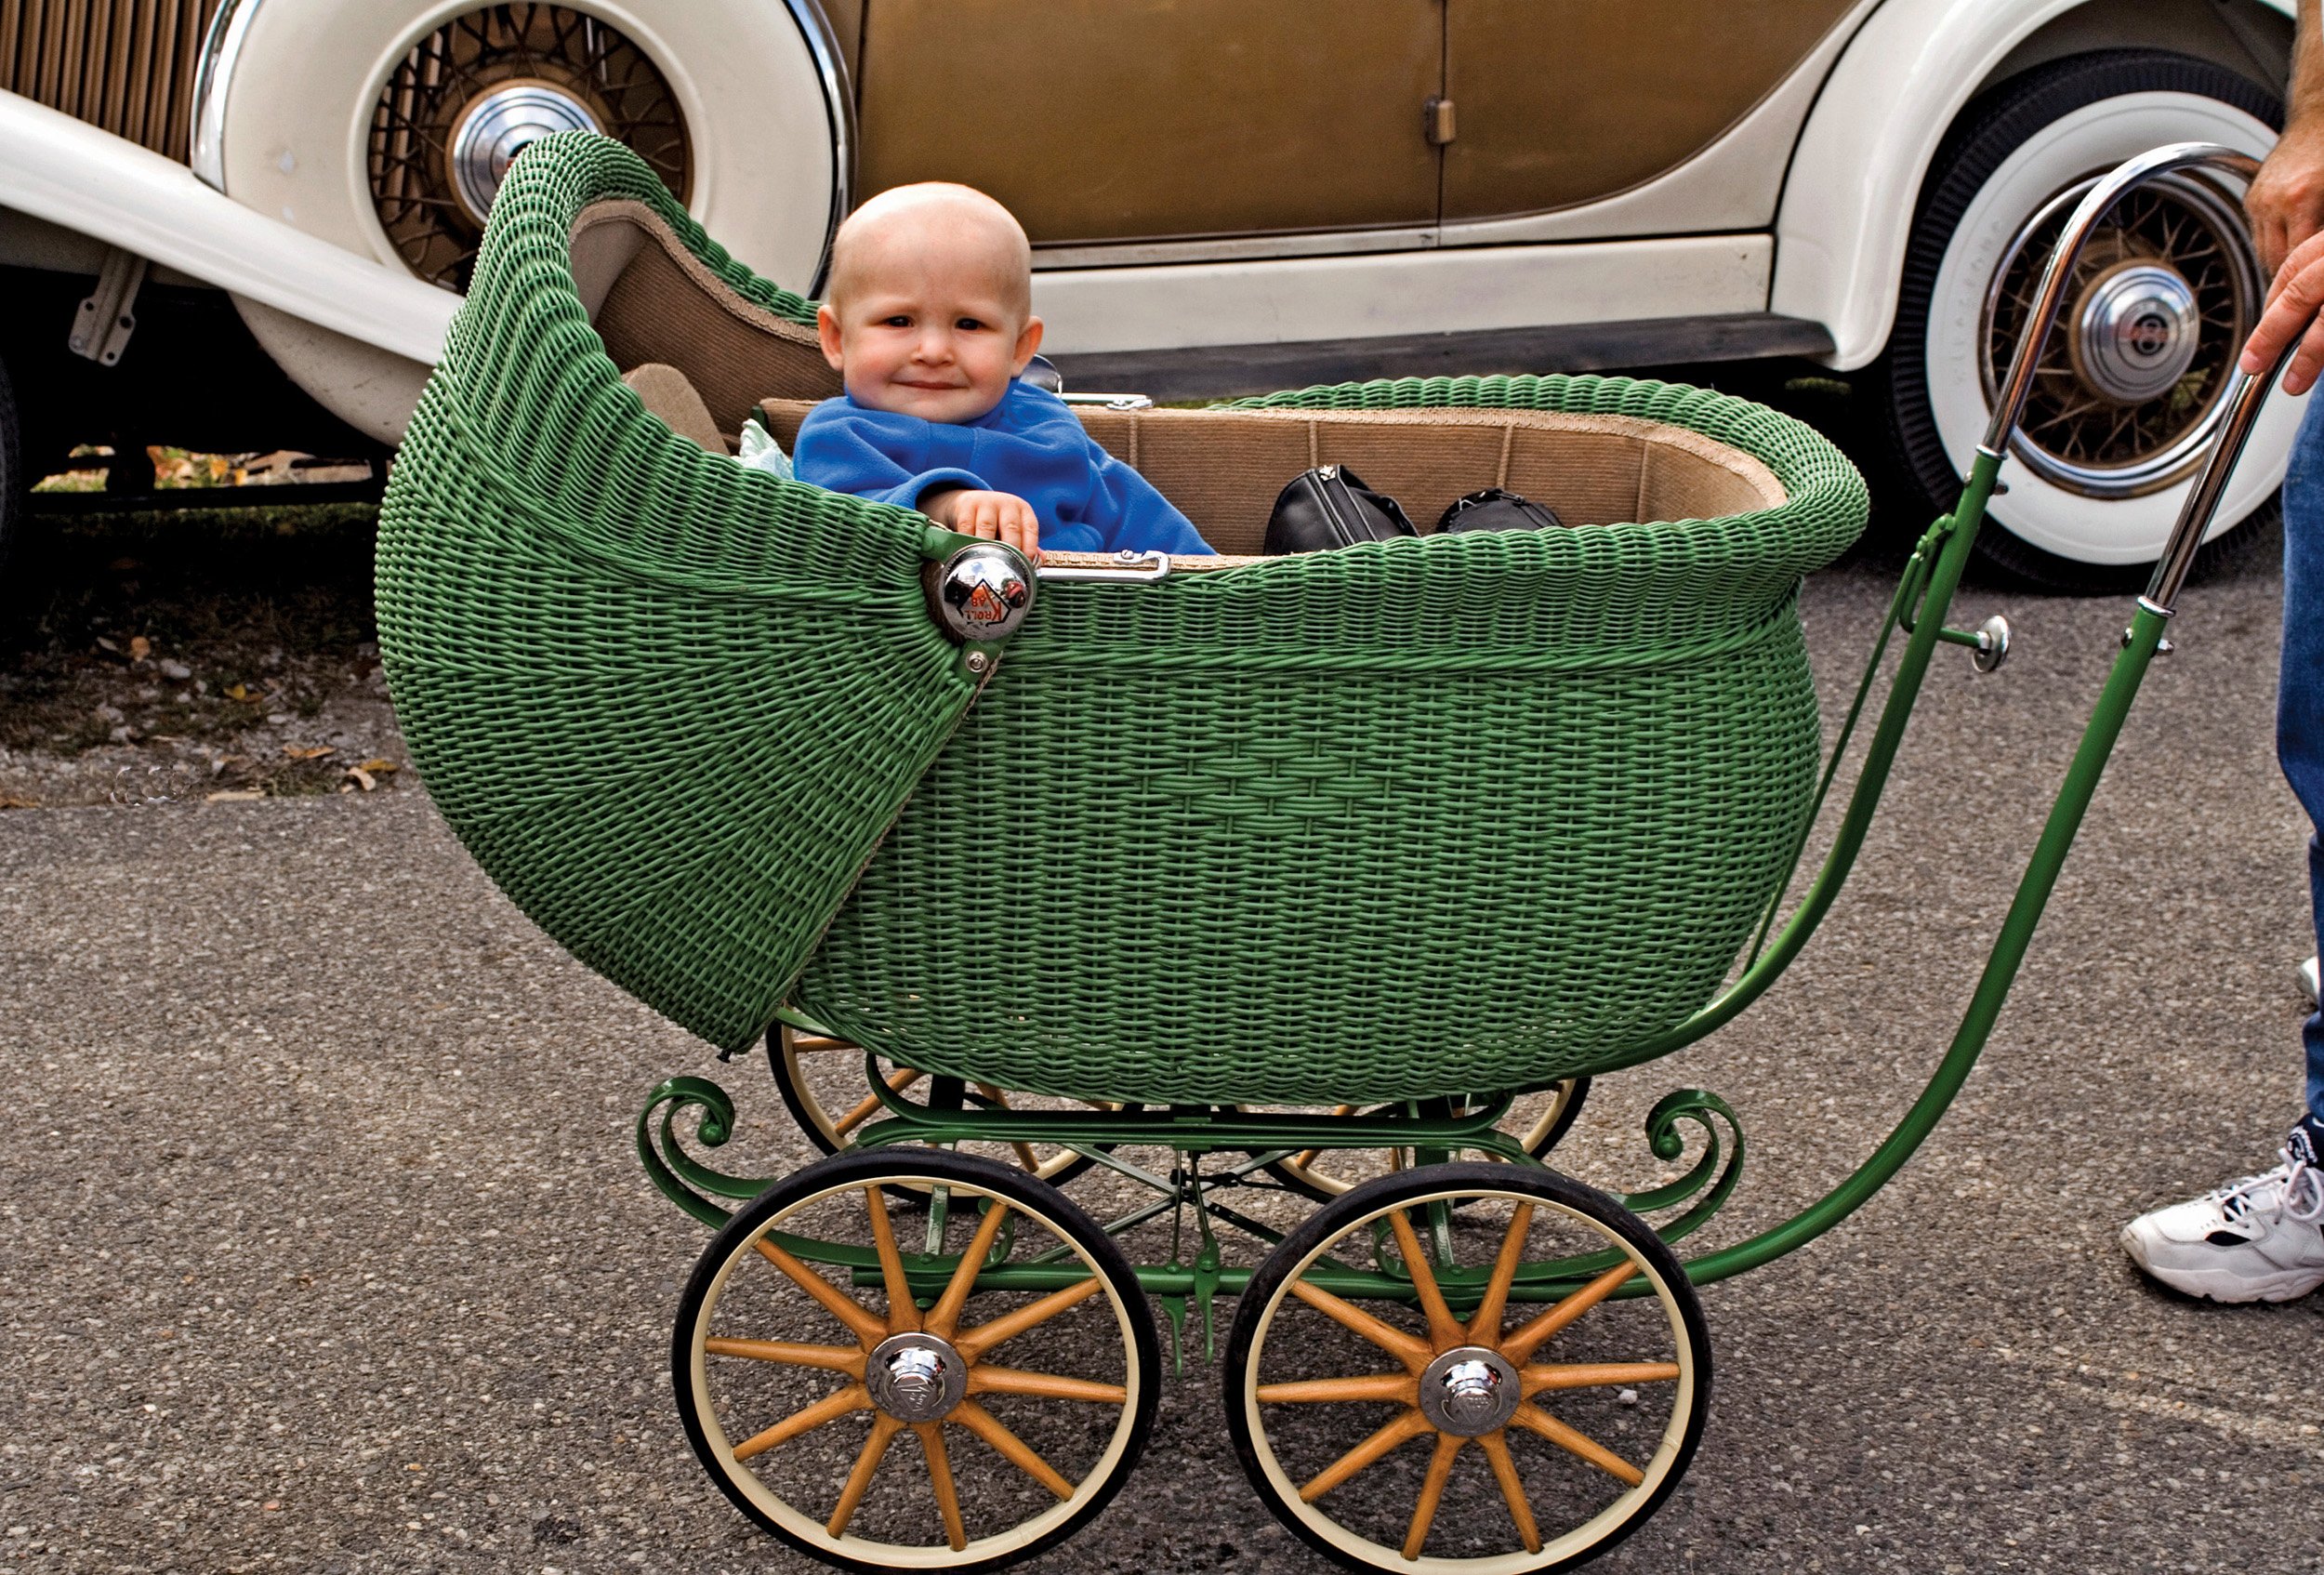  Unidentified baby in an antique wicker carriage, at the annual Newport Antique Auto Hill climb event. Antique cars, trucks and motorcycles make timed runs up a steep hill to a finish line 1,800 feet away.  Newport, Indiana. September, 2006 